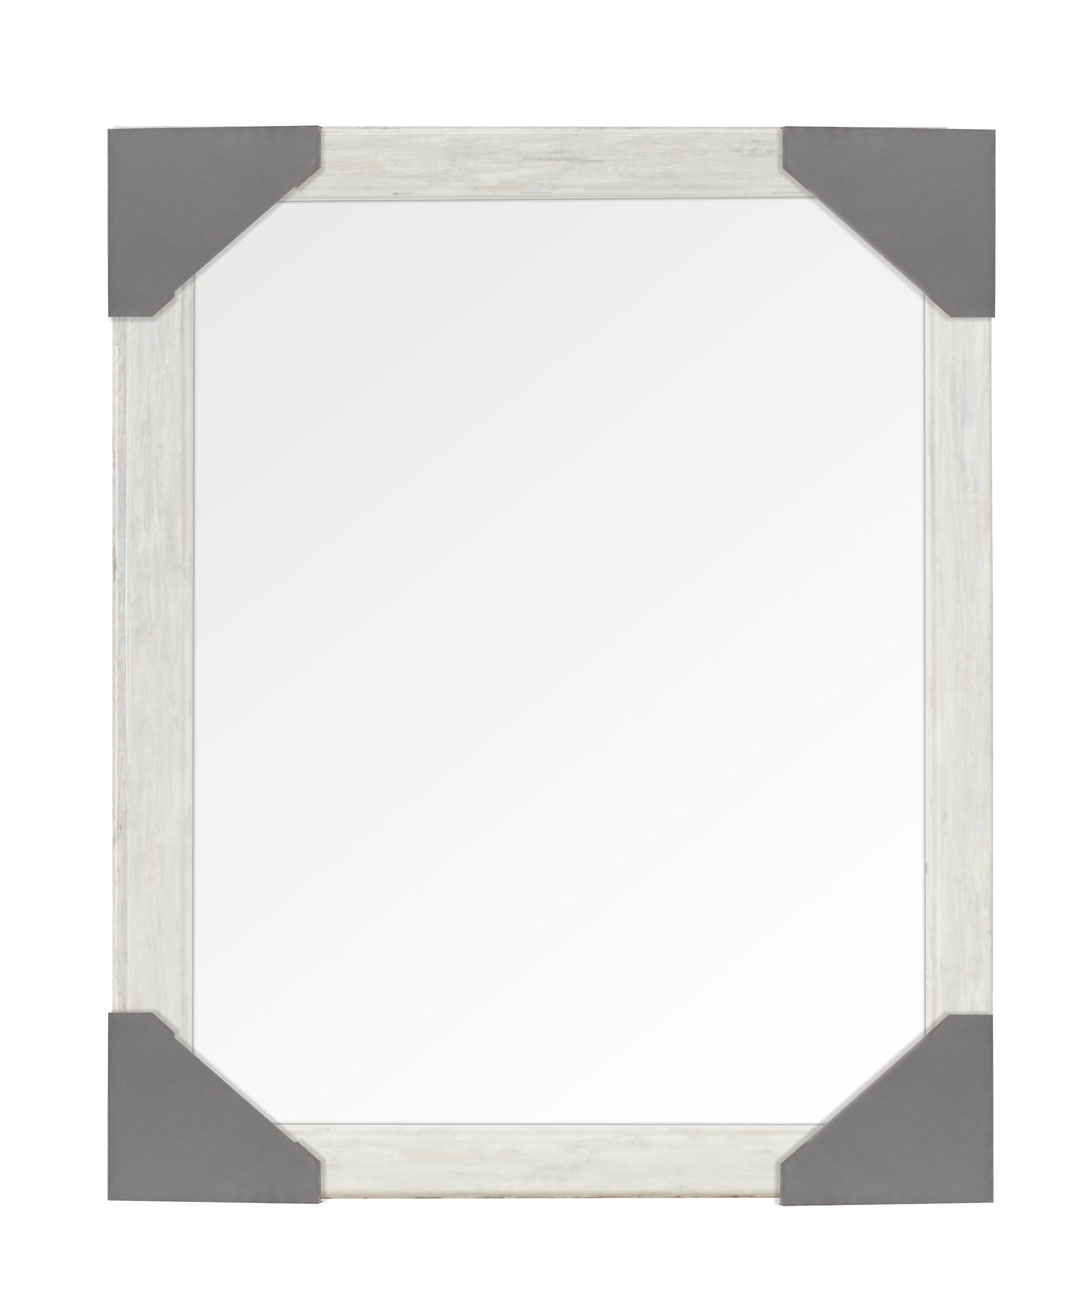 PS WALL MIRROR 40X50CM ASSORTED COLORS